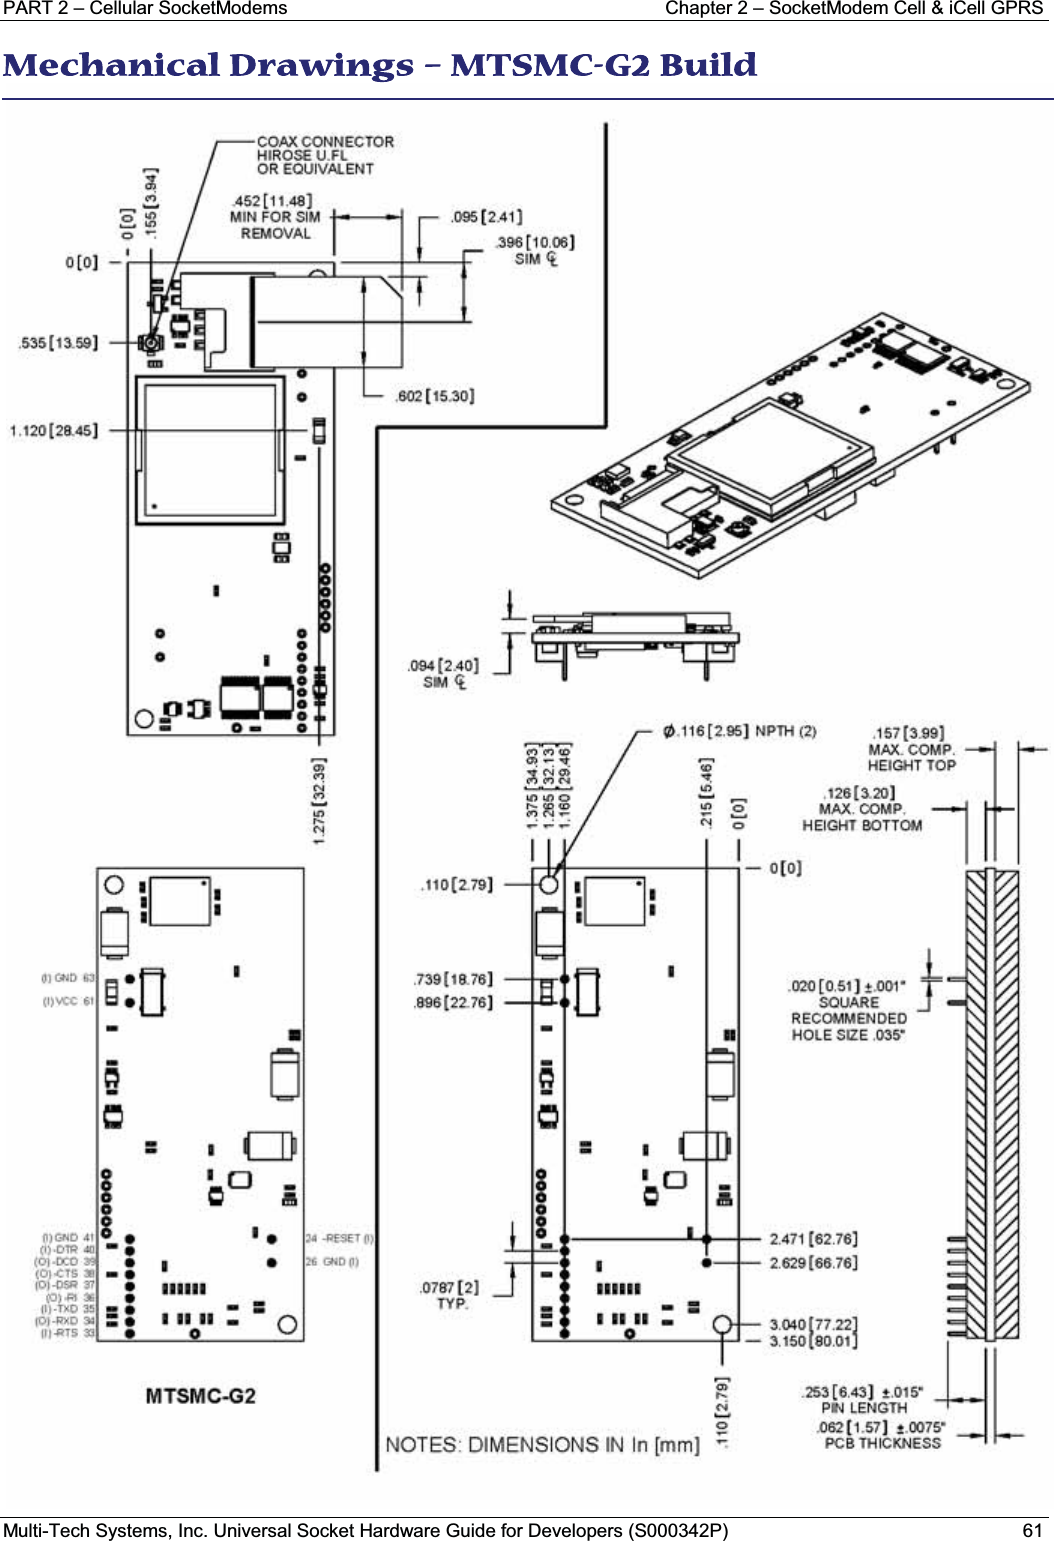 PART 2 – Cellular SocketModems  Chapter 2 – SocketModem Cell &amp; iCell GPRSMulti-Tech Systems, Inc. Universal Socket Hardware Guide for Developers (S000342P) 61MMechanical Drawings – MTSMC-G2 Build  